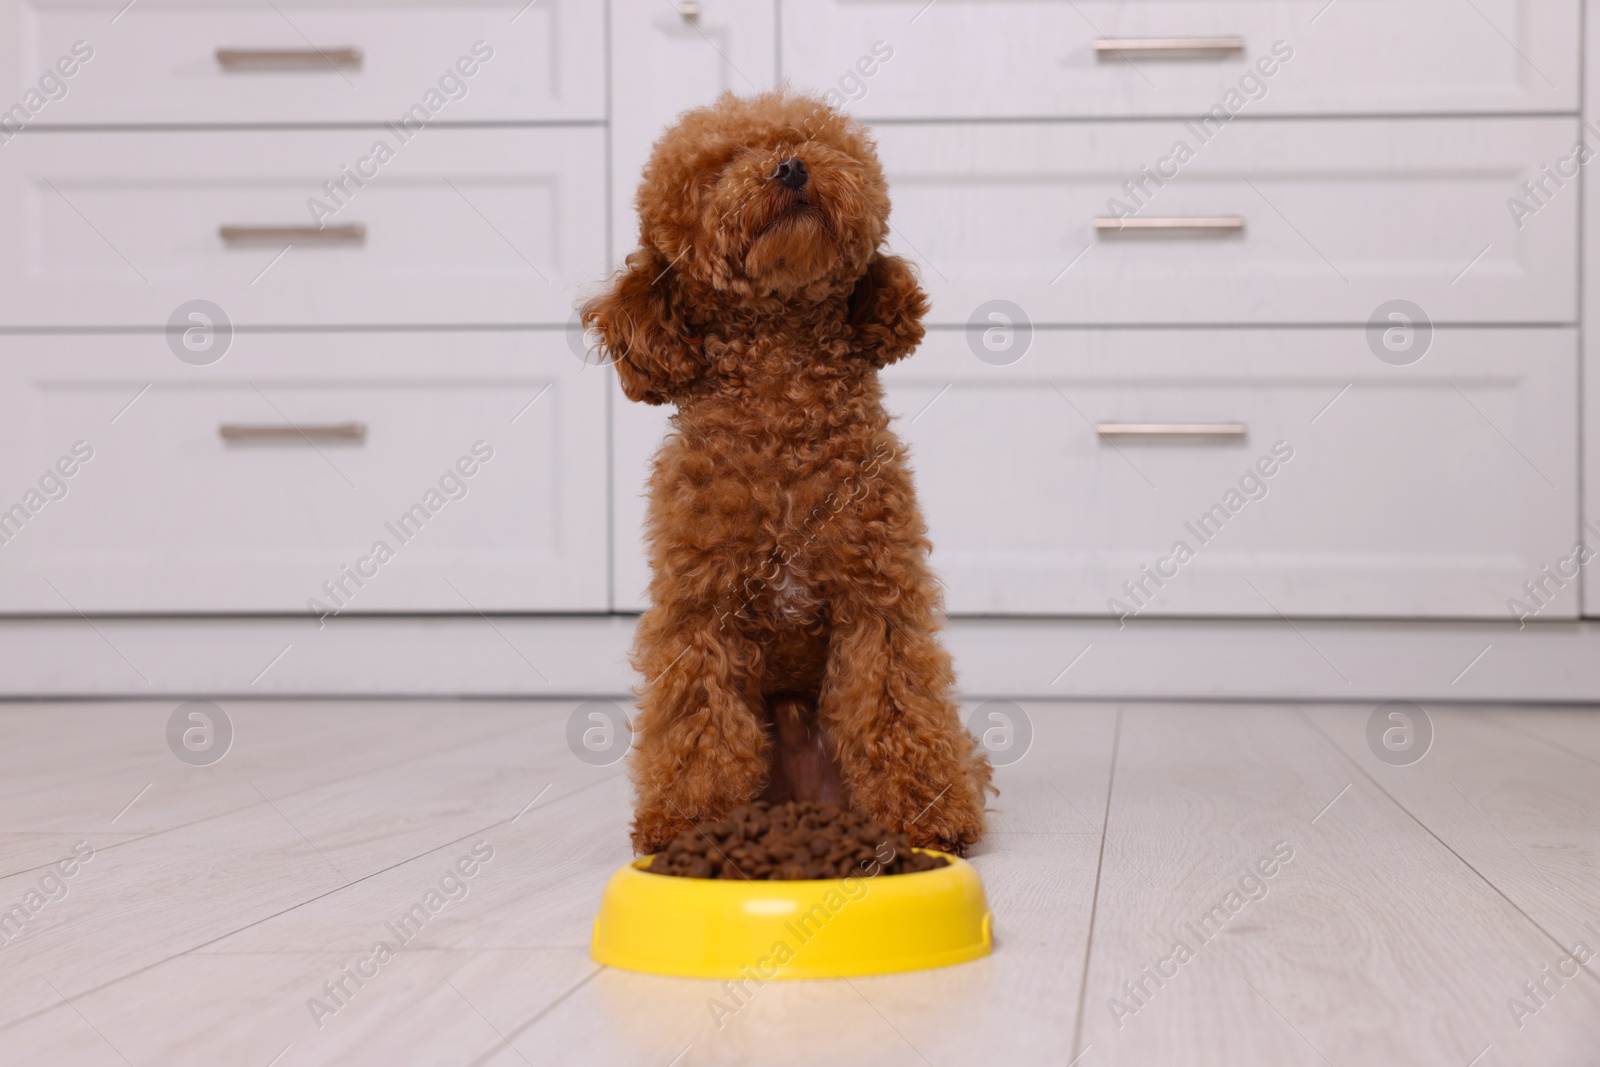 Photo of Cute Maltipoo dog near feeding bowl with dry food on floor indoors. Lovely pet